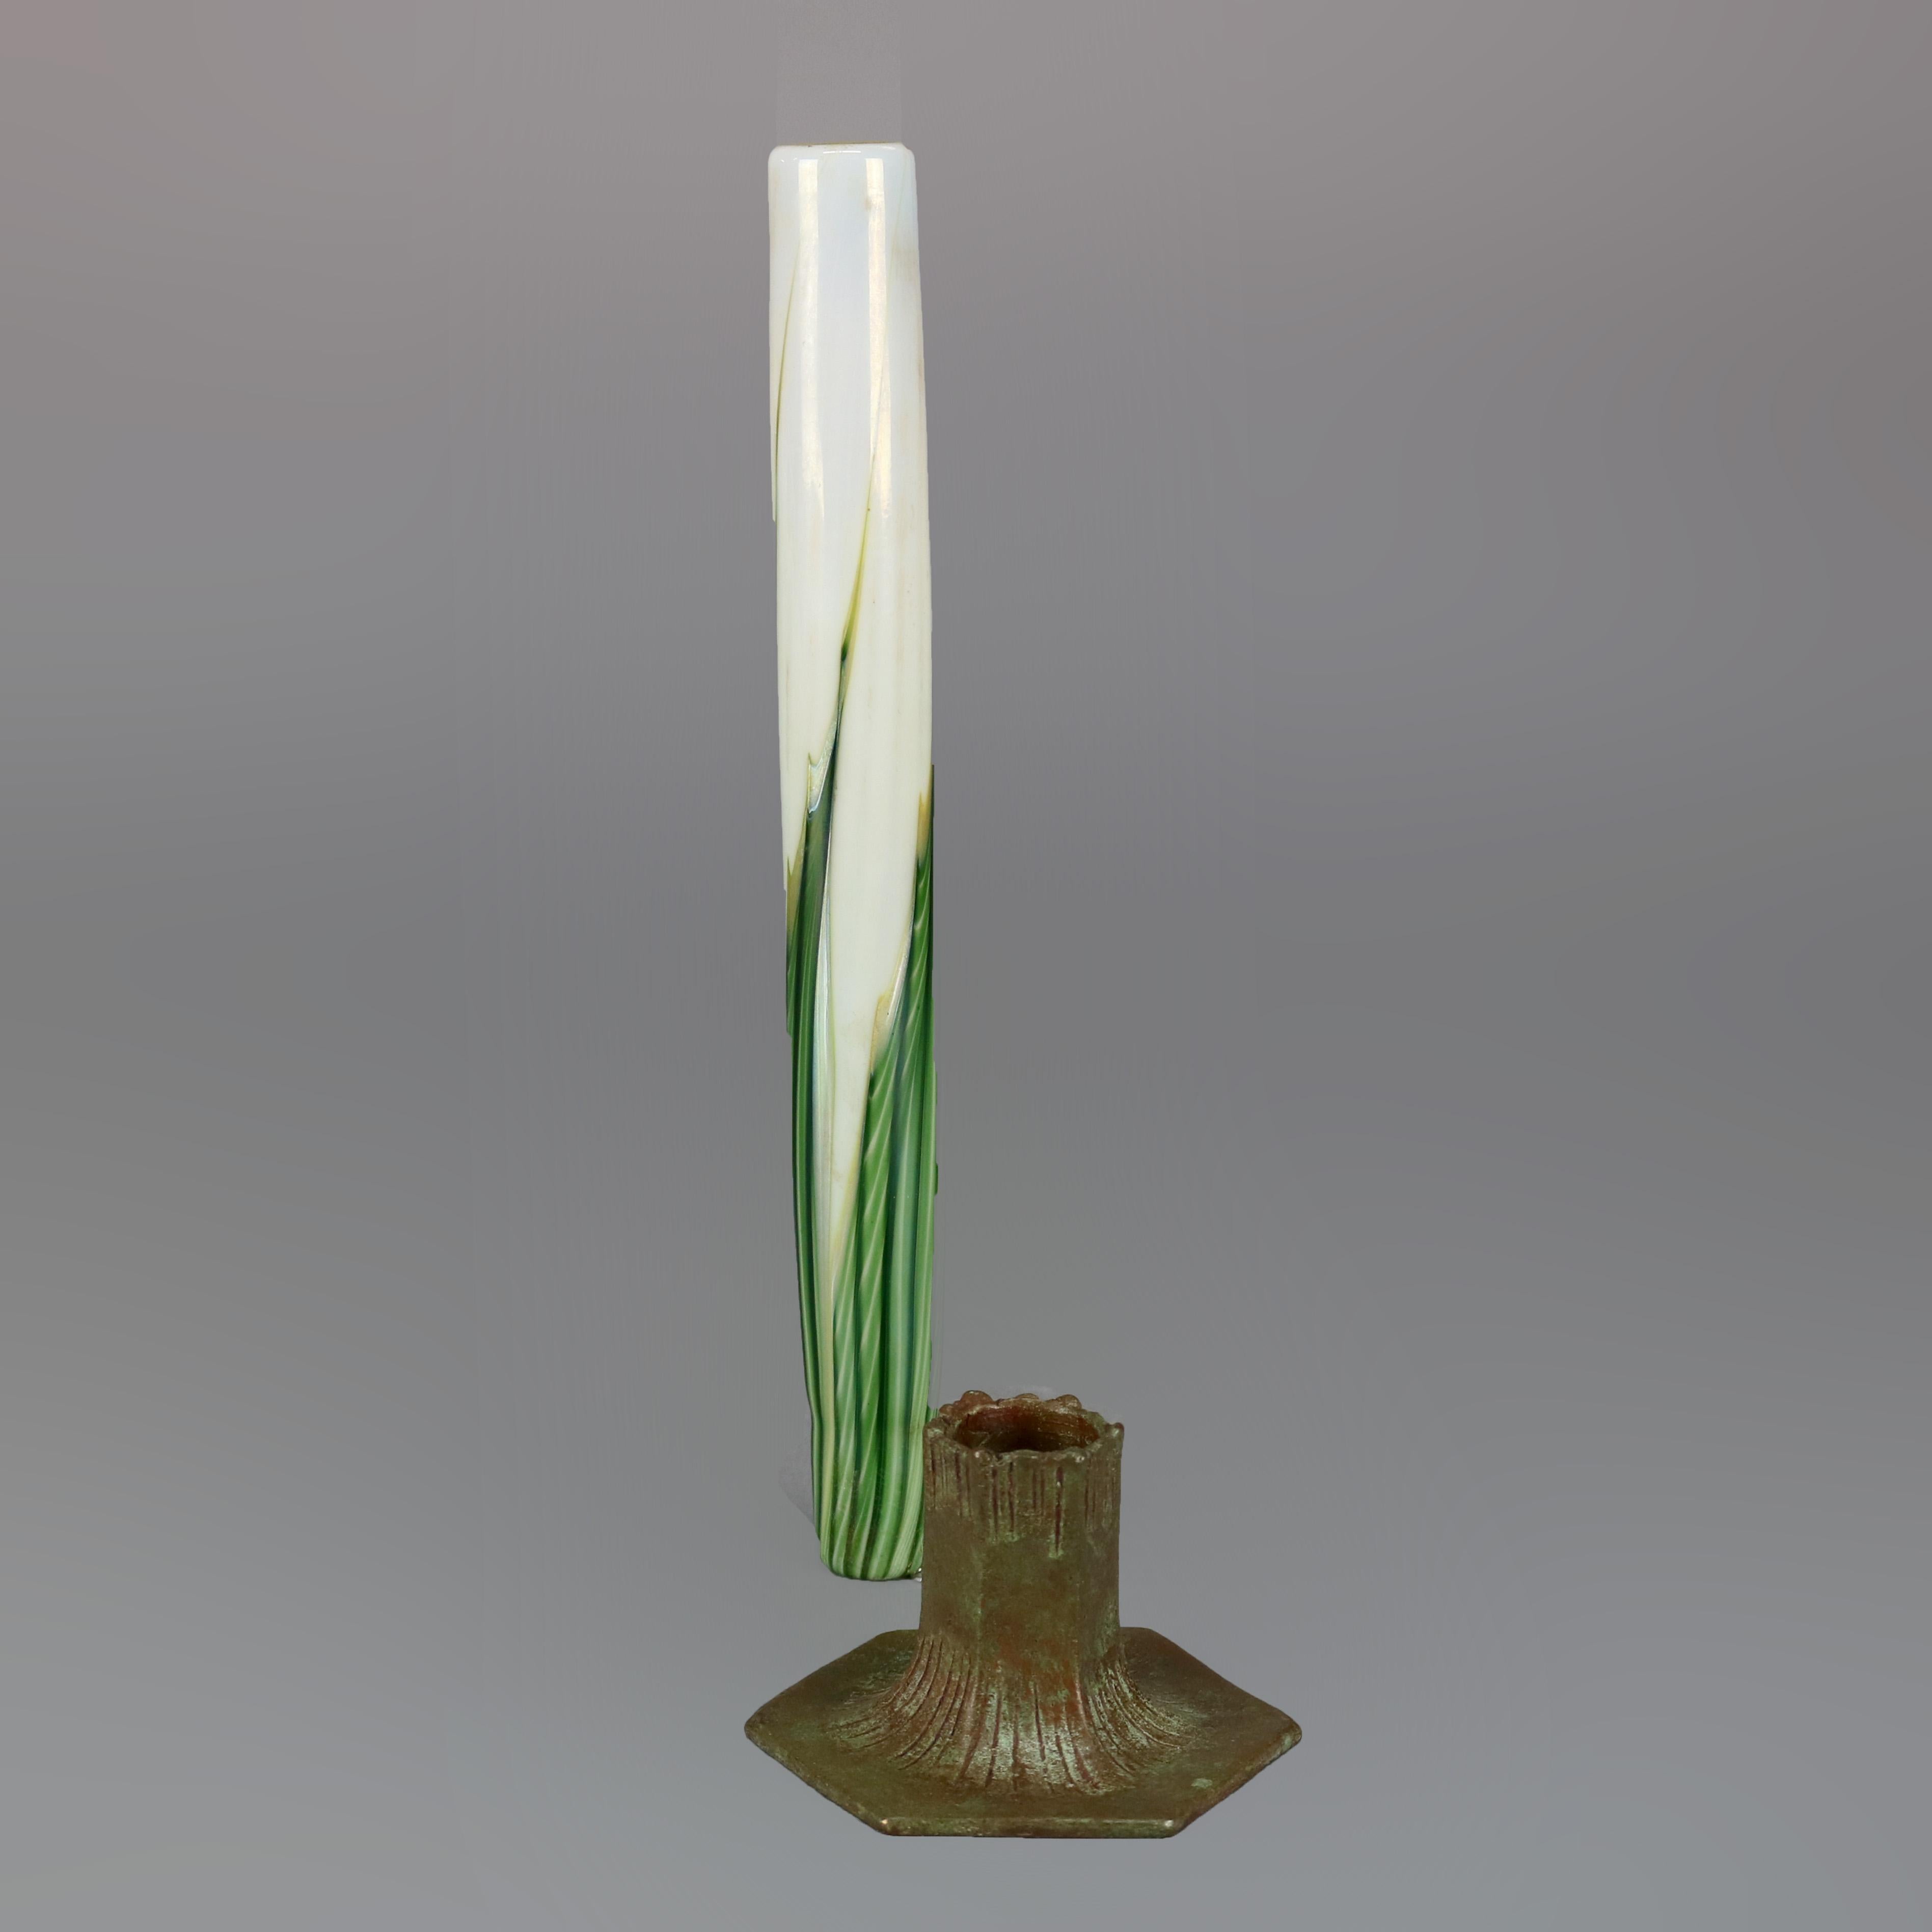 Art Nouveau Antique Bronze & Pulled Feather Art Glass Bud Vase After Tiffany, 20th C